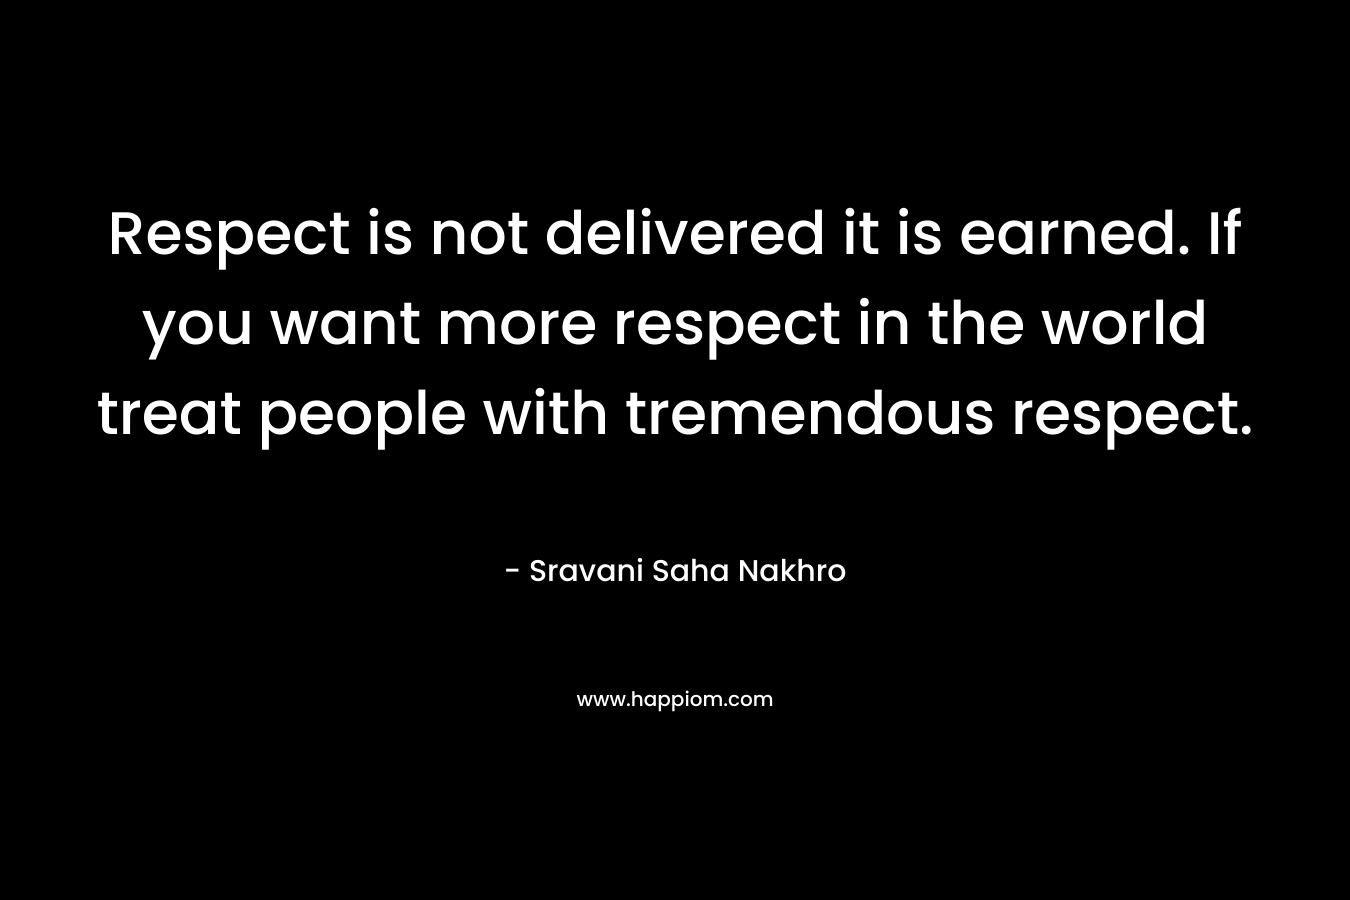 Respect is not delivered it is earned. If you want more respect in the world treat people with tremendous respect.